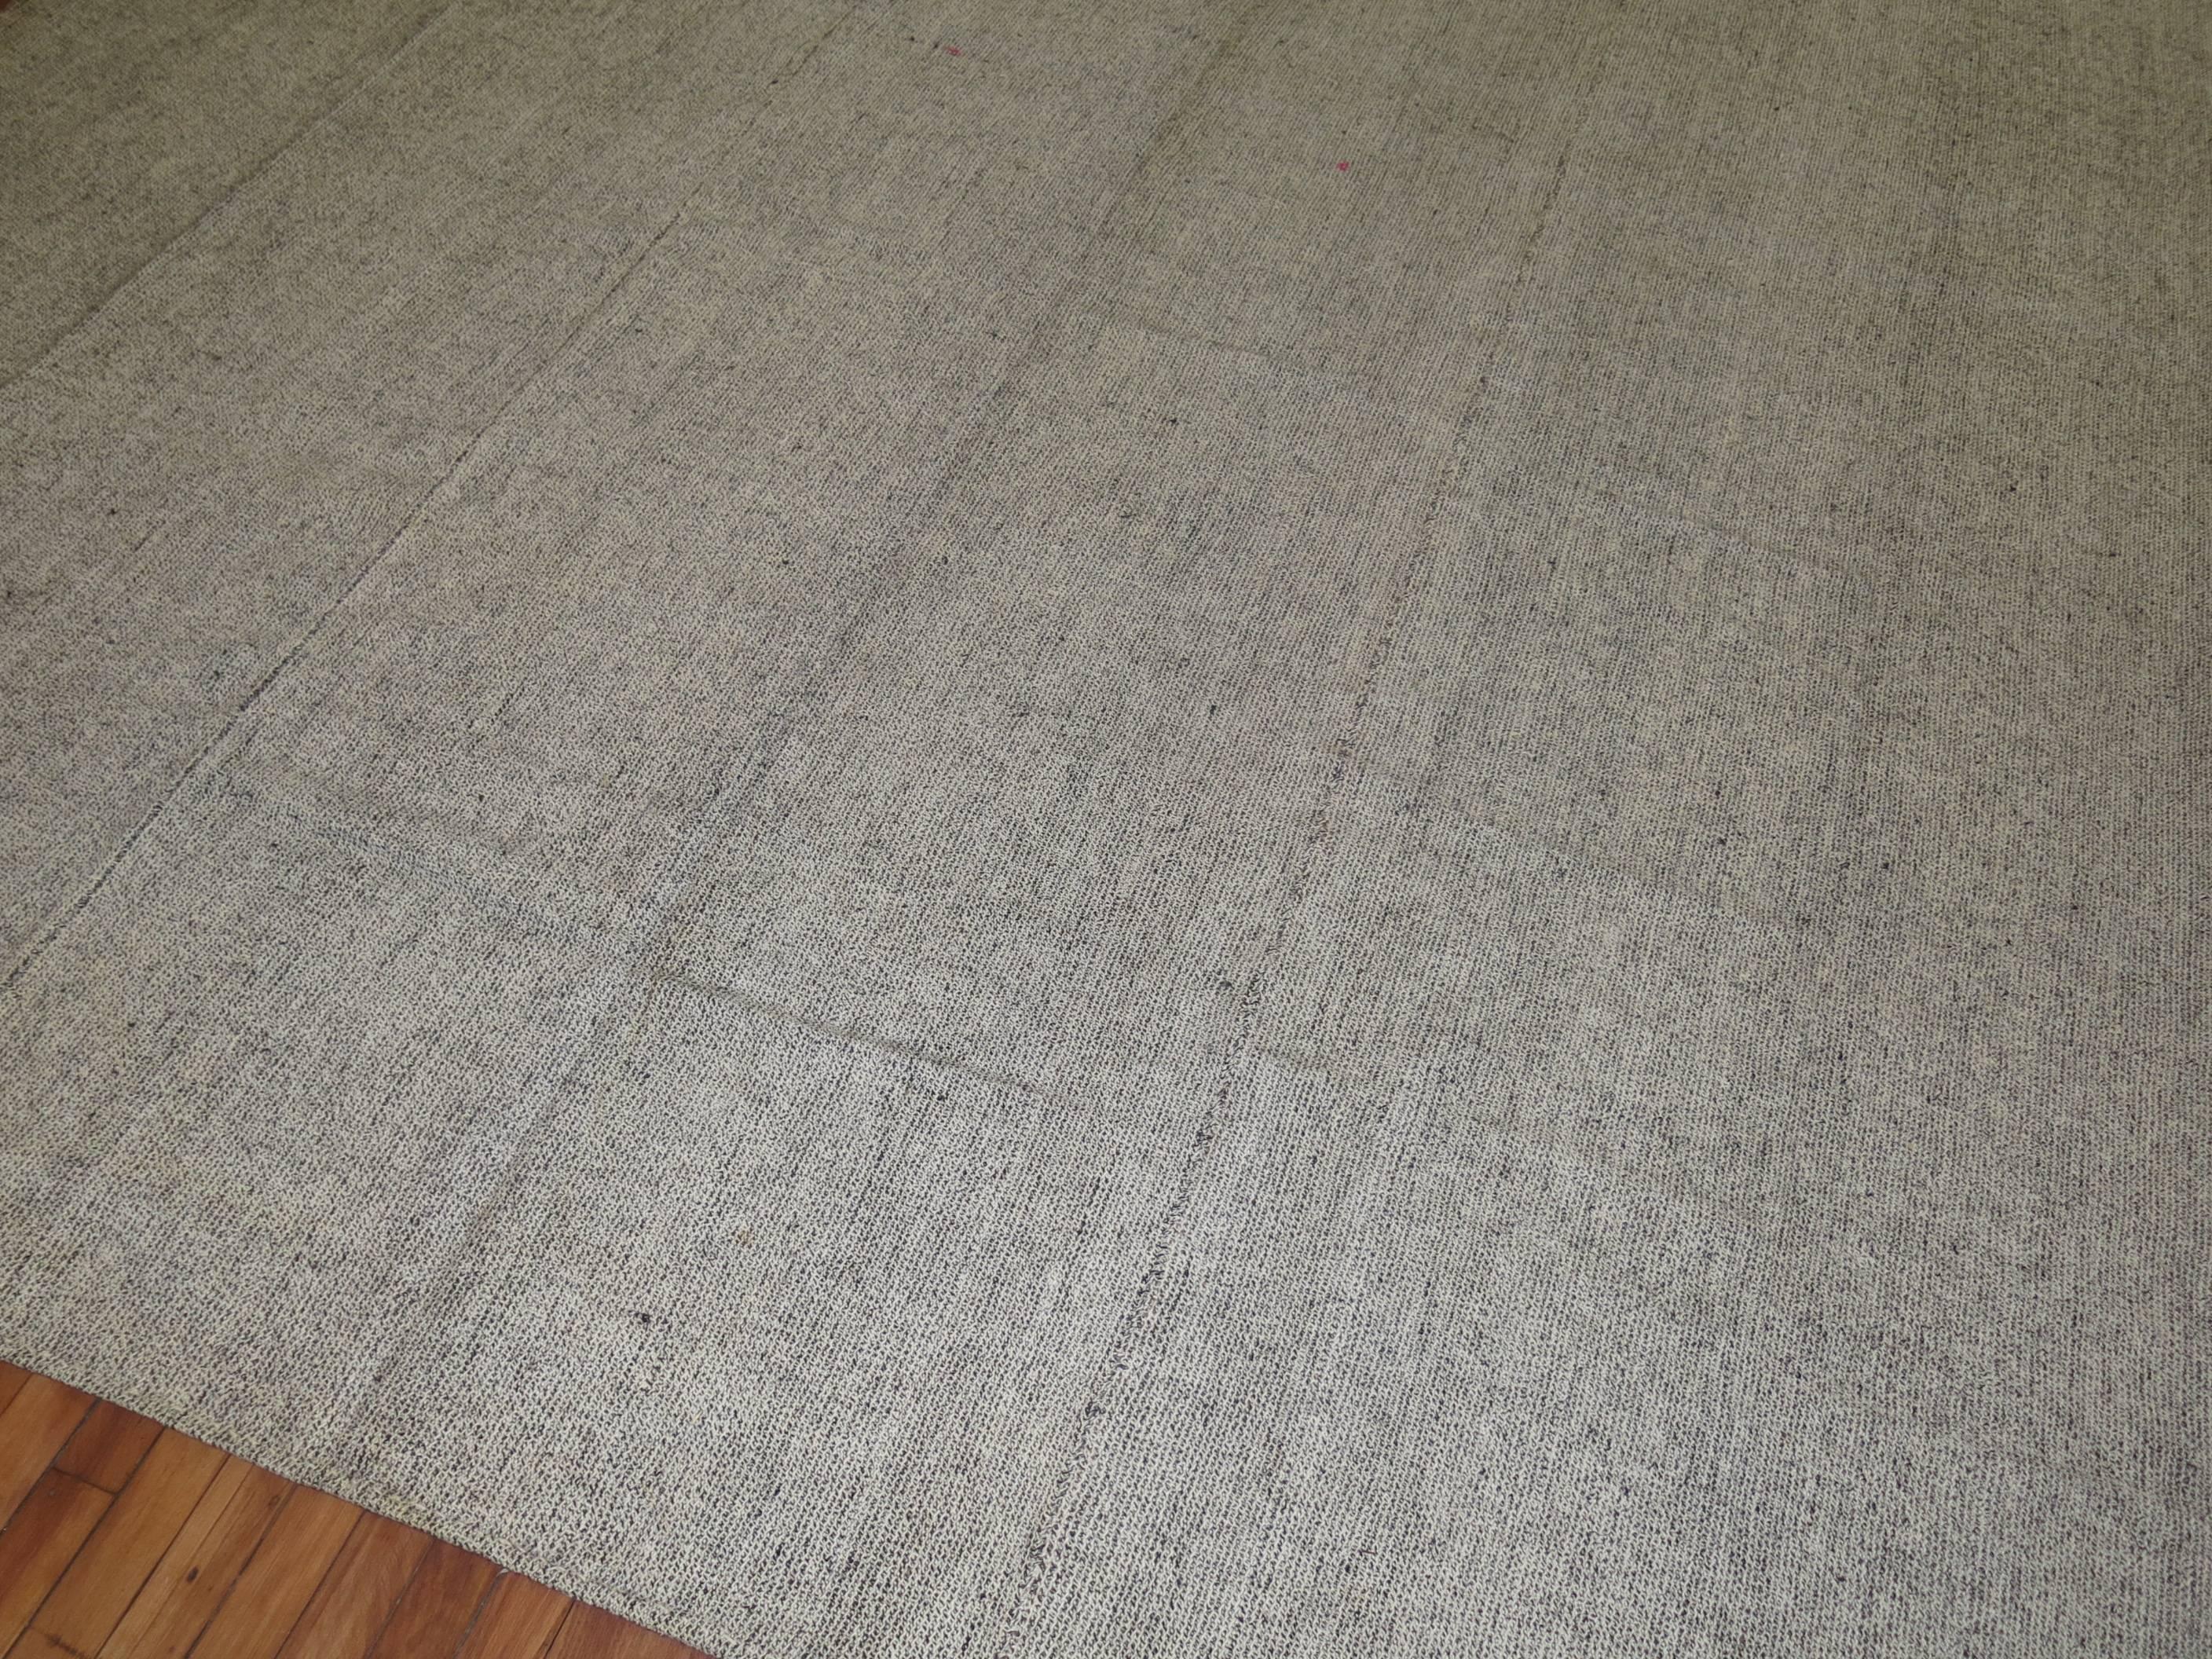 Gray Vintage Turkish Kilim Flat-Weave In Good Condition For Sale In New York, NY